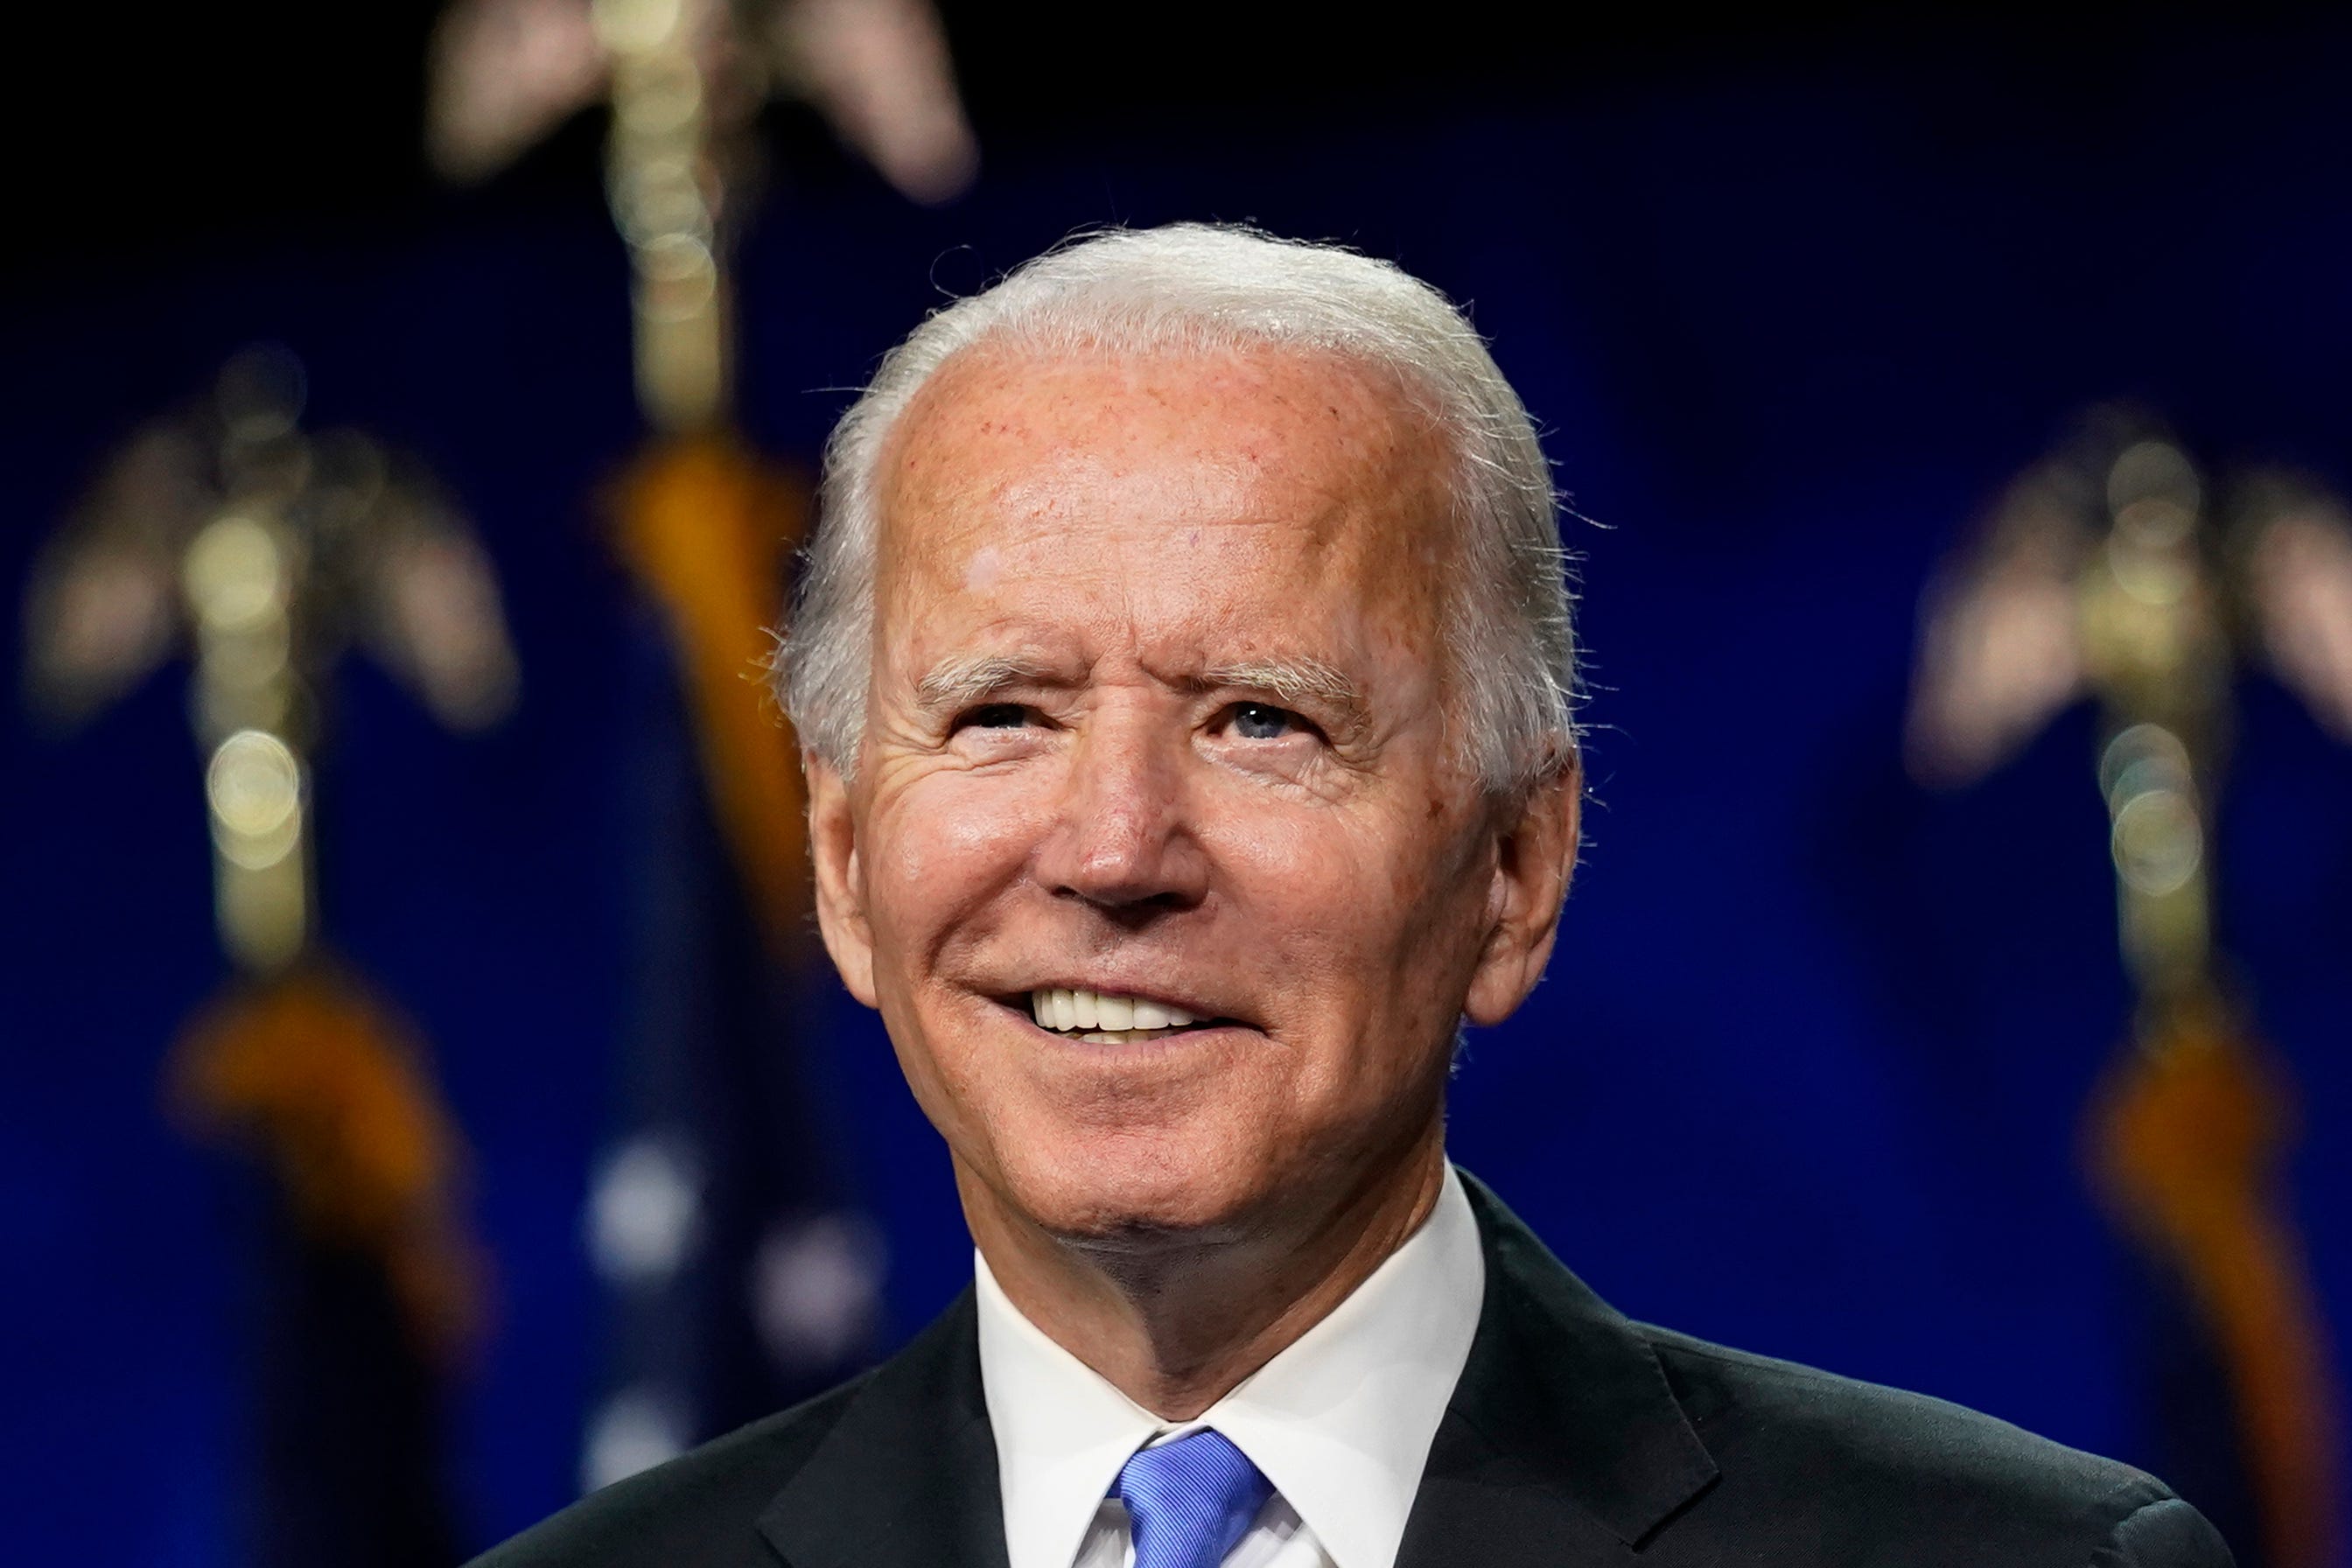 joe biden folksy yet - Biden|President|Joe|States|Delaware|Obama|Vice|Senate|Campaign|Election|Time|Administration|House|Law|People|Years|Family|Year|Trump|School|University|Senator|Office|Party|Country|Committee|Act|War|Days|Climate|Hunter|Health|America|State|Day|Democrats|Americans|Documents|Care|Plan|United States|Vice President|White House|Joe Biden|Biden Administration|Democratic Party|Law School|Presidential Election|President Joe Biden|Executive Orders|Foreign Relations Committee|Presidential Campaign|Second Term|47Th Vice President|Syracuse University|Climate Change|Hillary Clinton|Last Year|Barack Obama|Joseph Robinette Biden|U.S. Senator|Health Care|U.S. Senate|Donald Trump|President Trump|President Biden|Federal Register|Judiciary Committee|Presidential Nomination|Presidential Medal